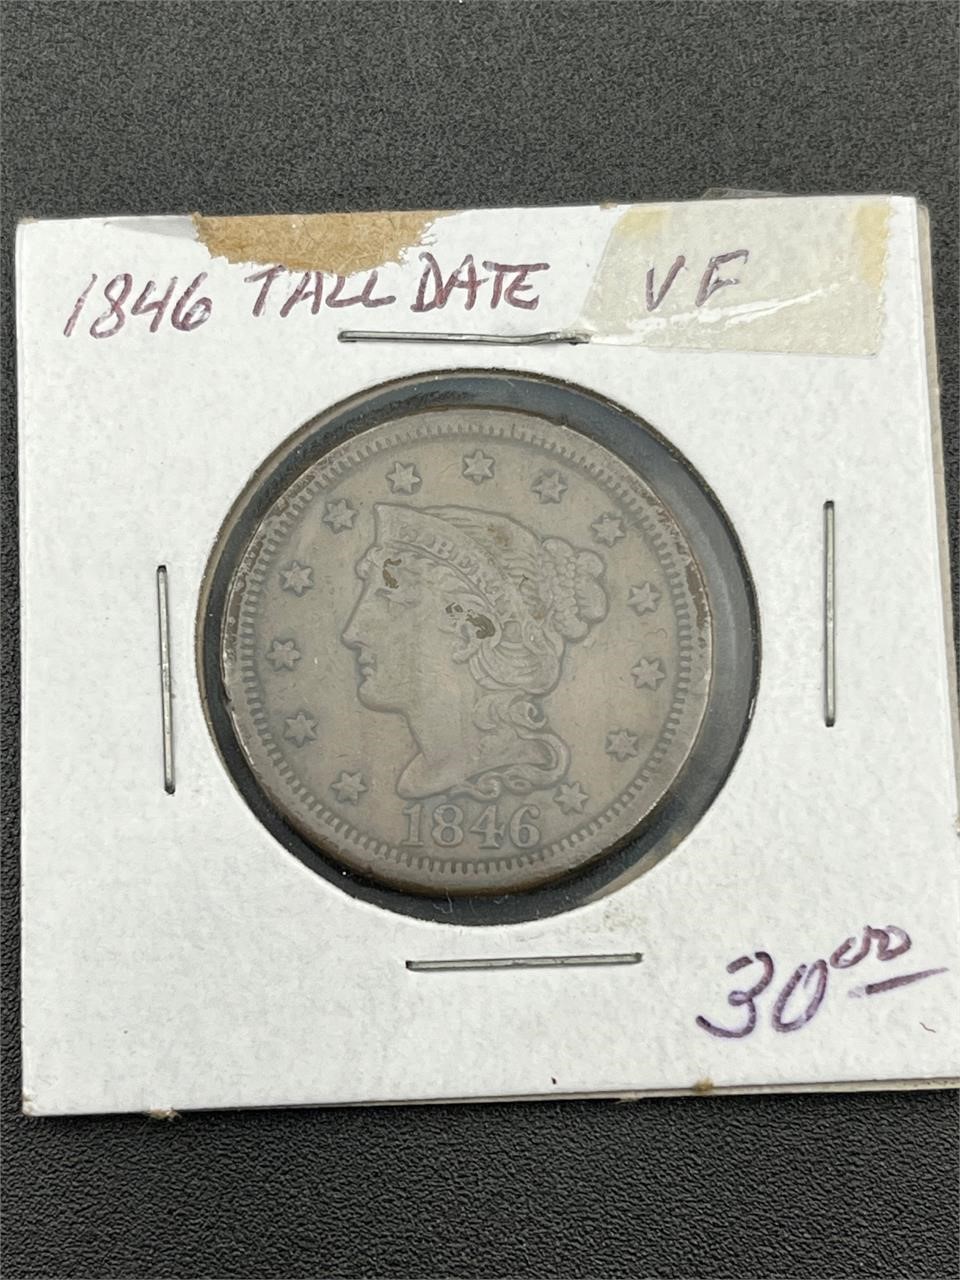 1846 Tall Date Penny